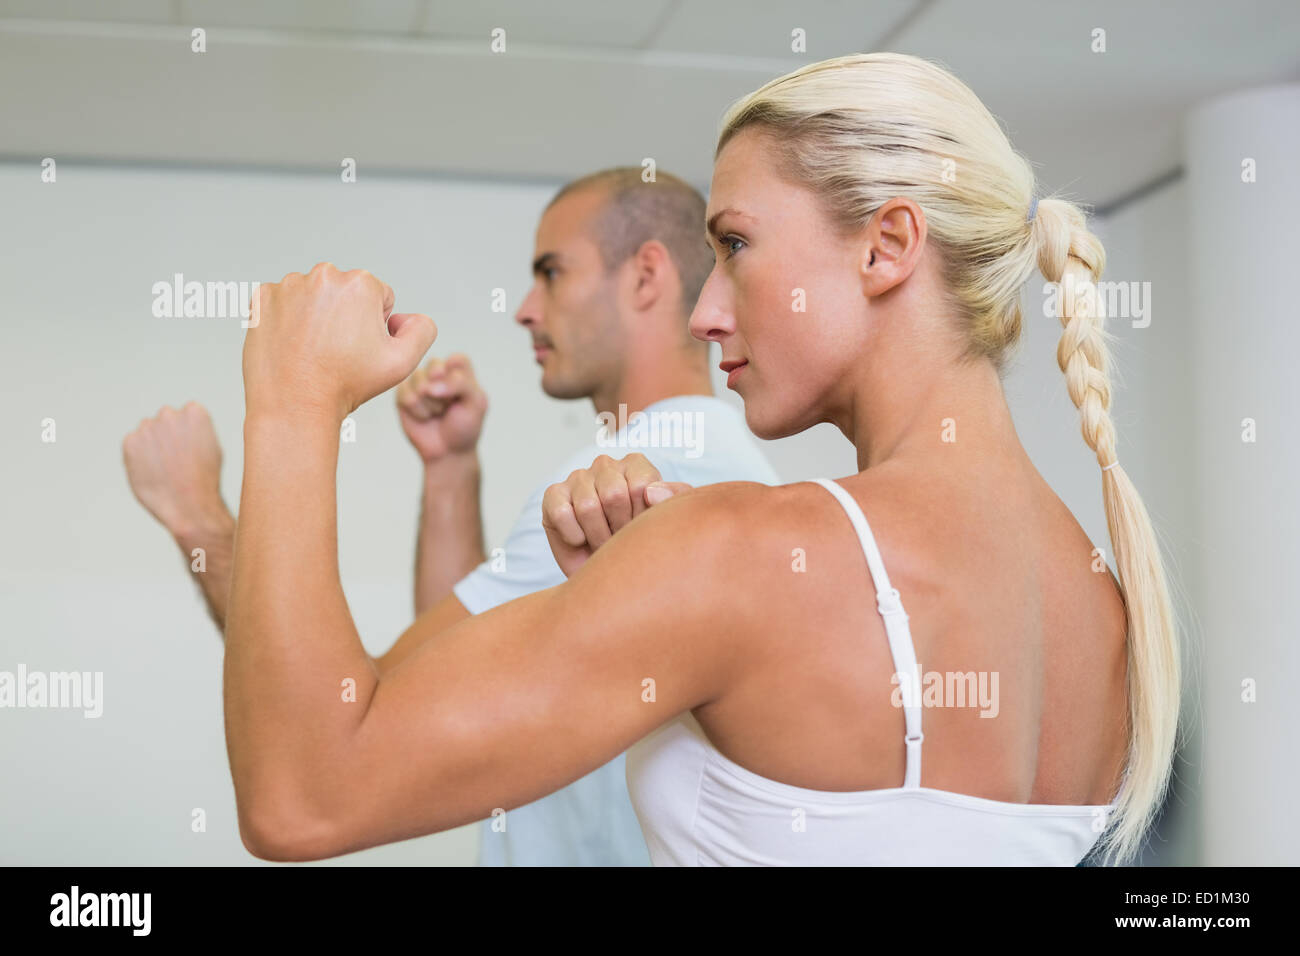 Sporty couple clenching fists at fitness studio Stock Photo